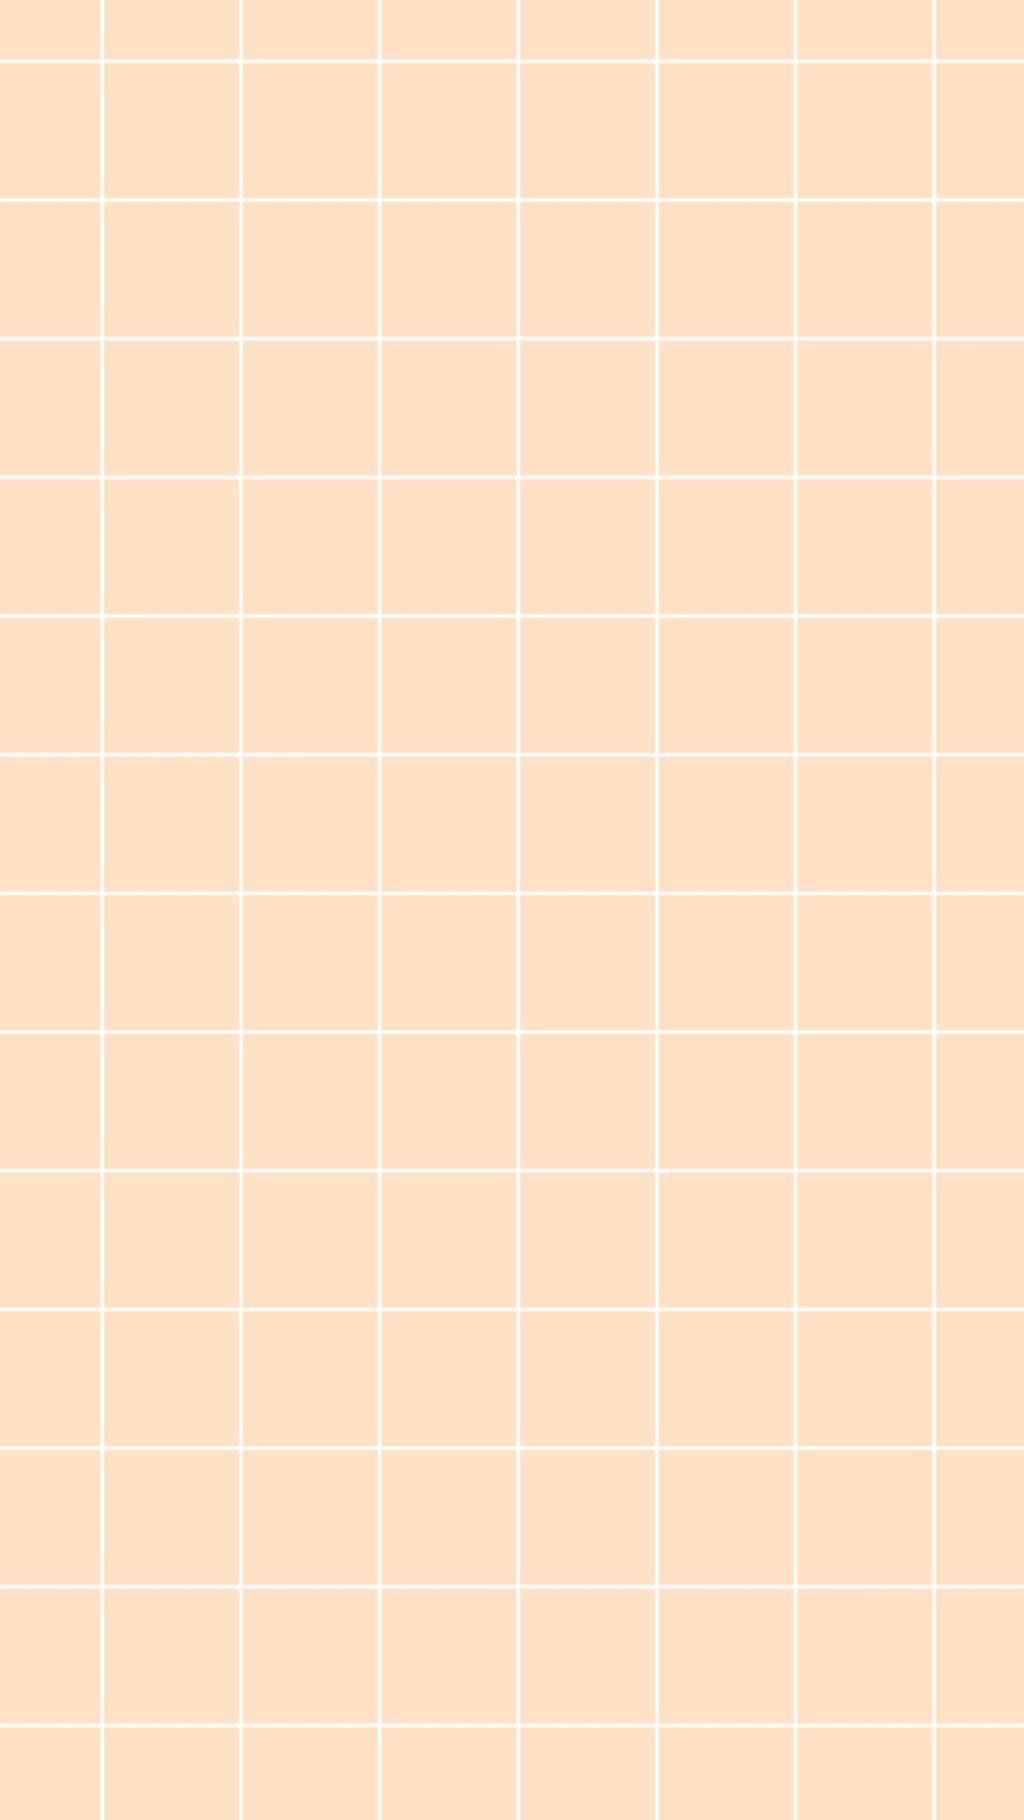 A grid of white lines on a peach background - Pastel, peach